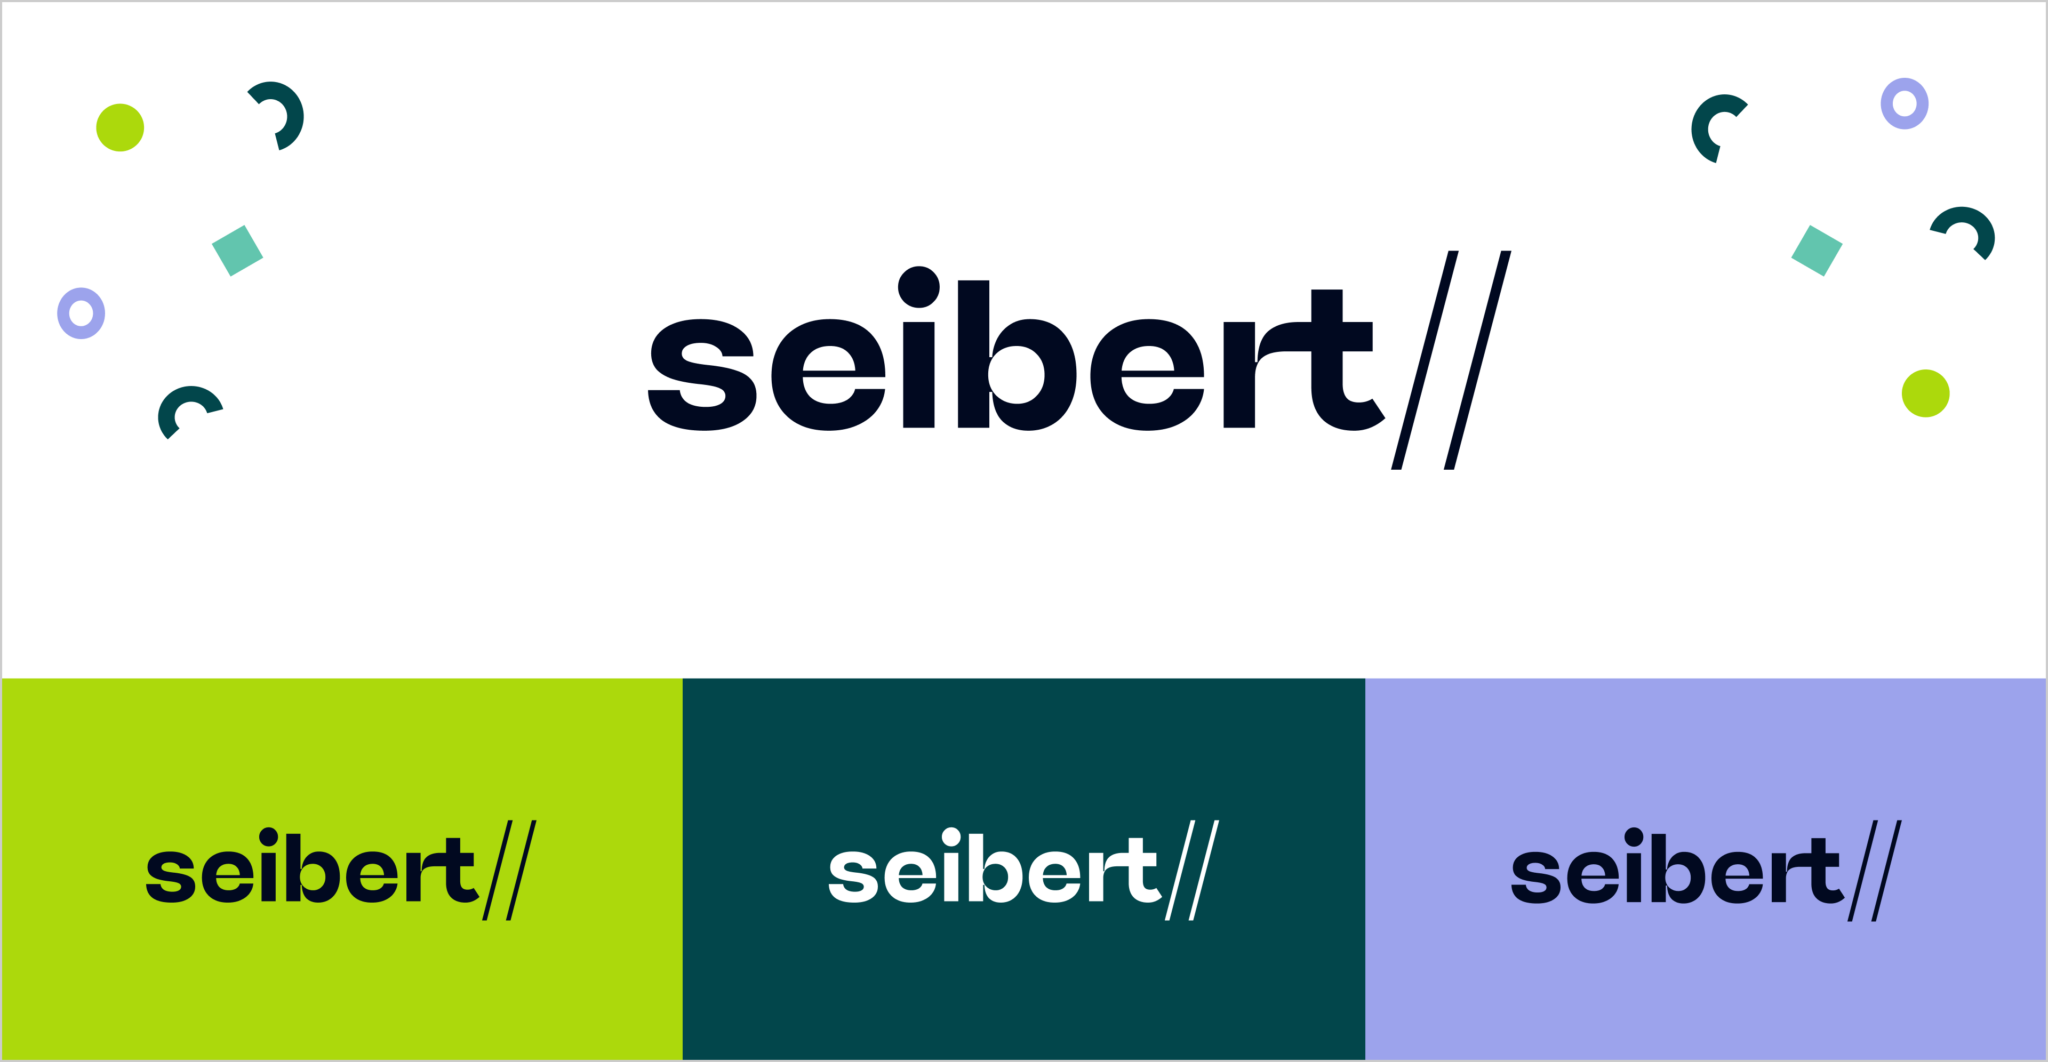 The Seibert Network Has a New Logo - new logo in different colors